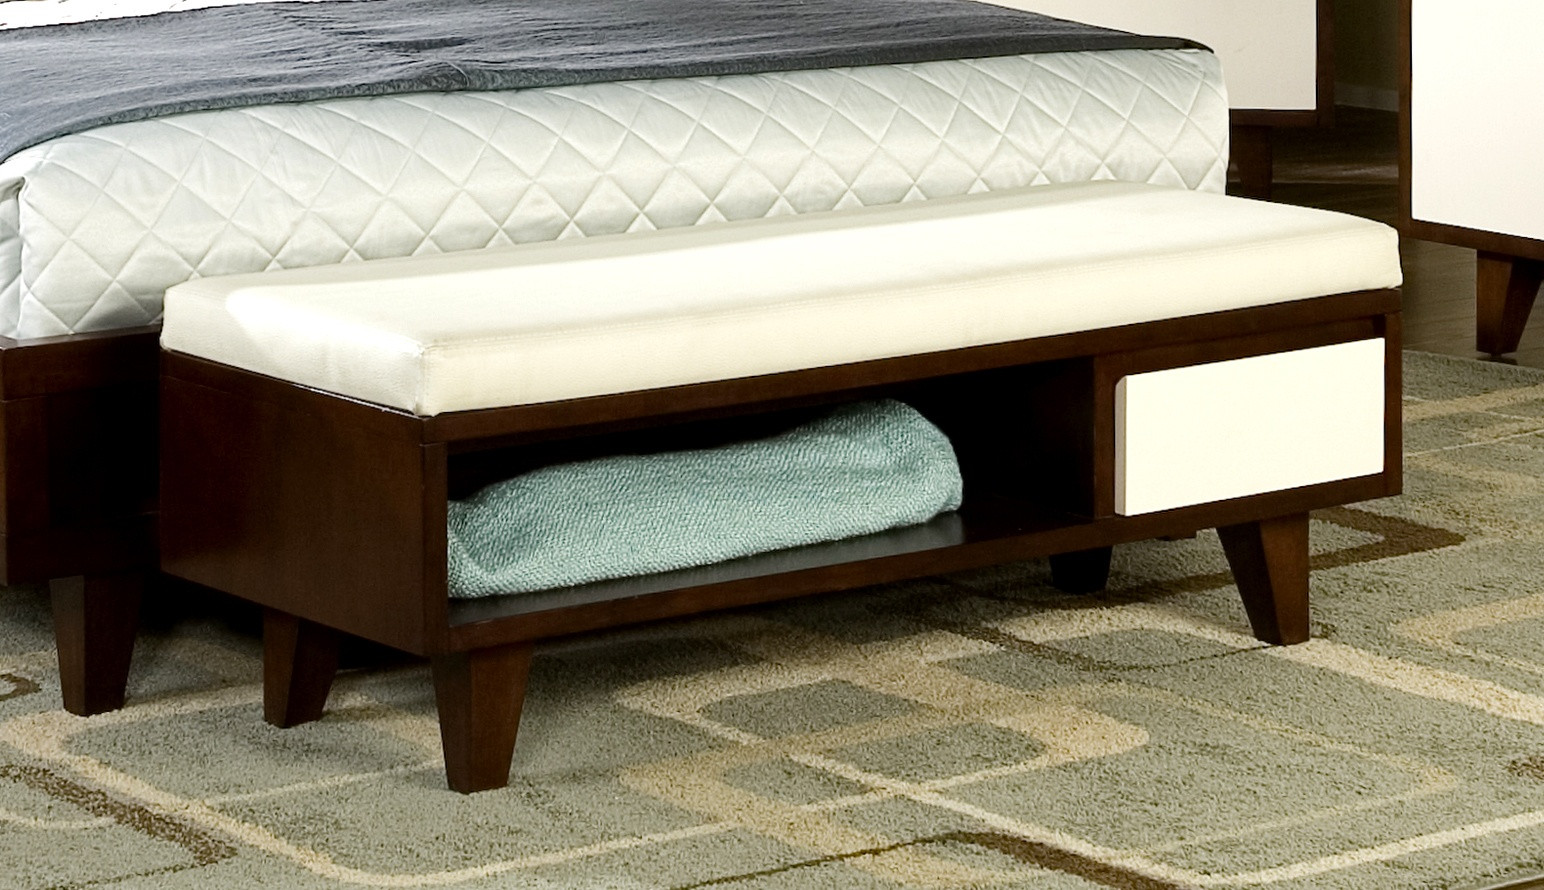 Large Storage Bench For Bedroom
 Bedroom Benches with Storage Ideas